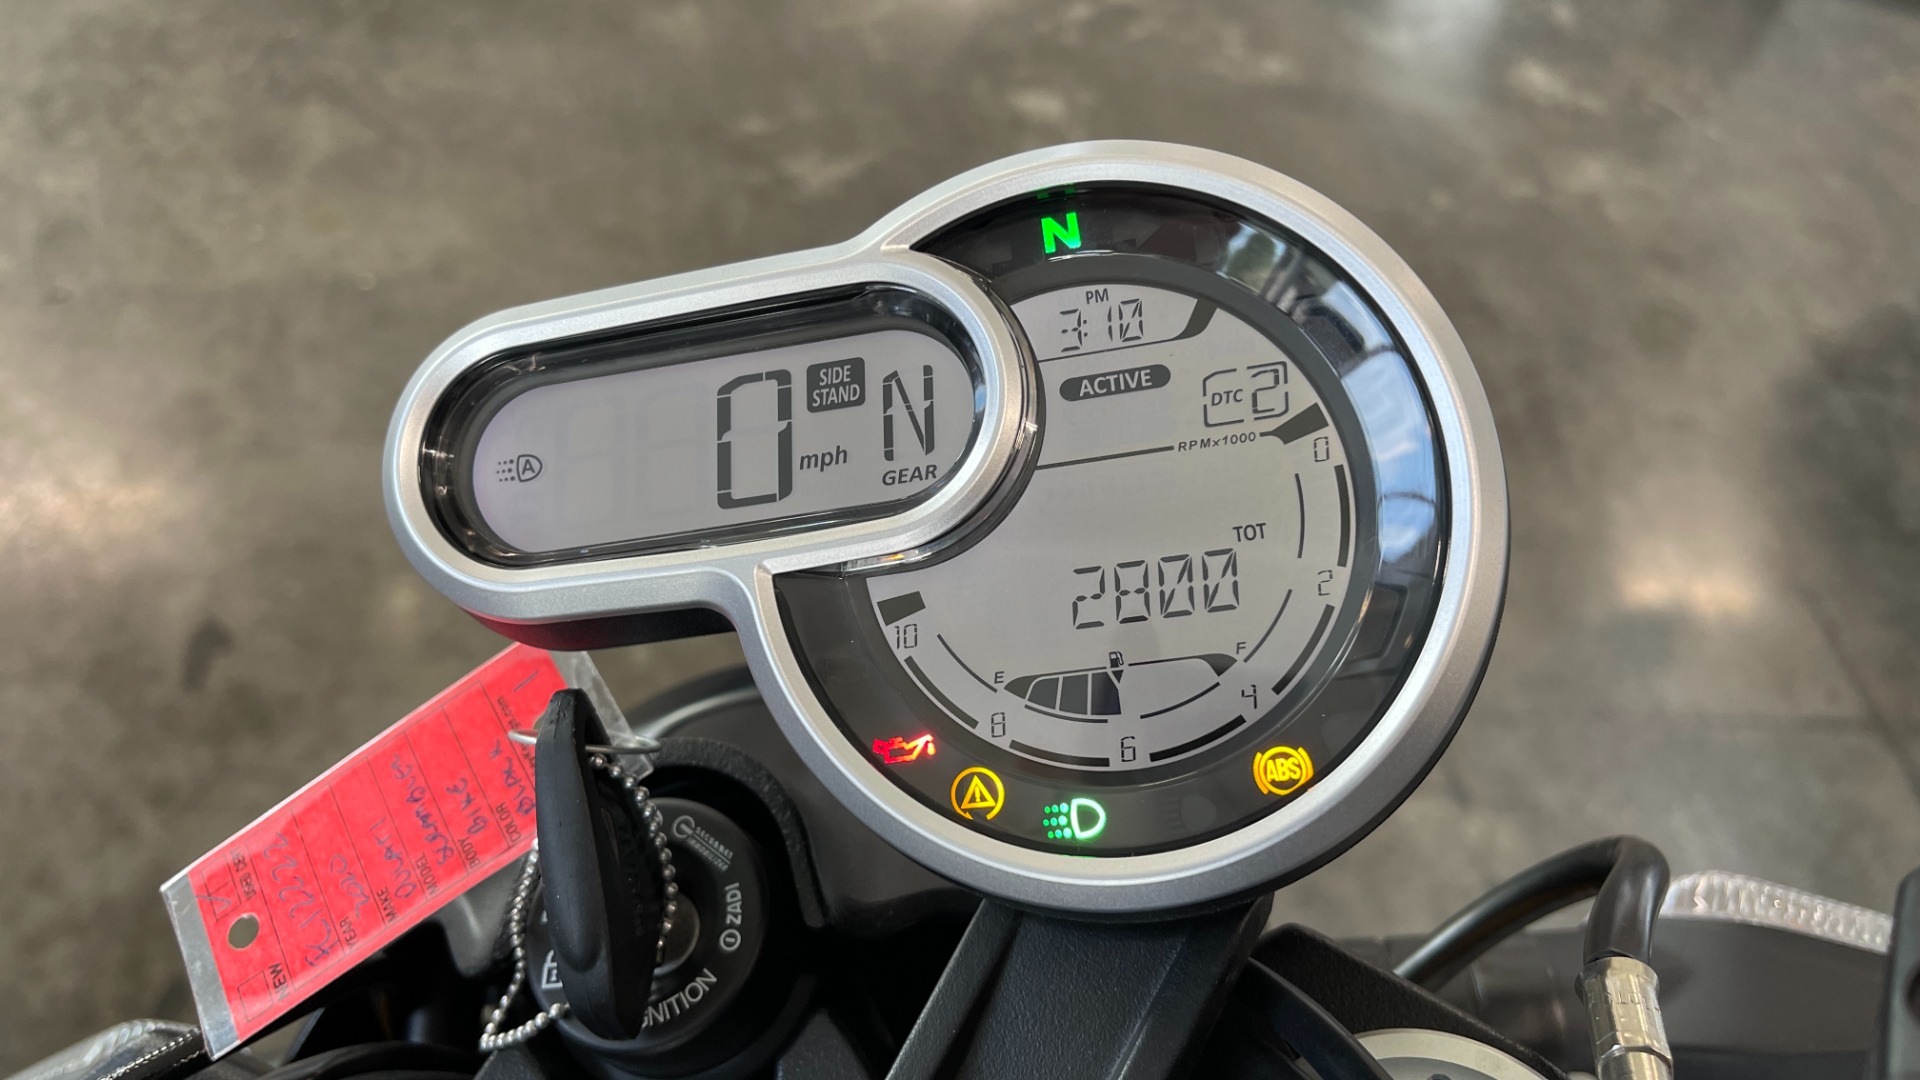 Used 2020 DUCATI SCRAMBLER 1100 SPORT PRO for sale Sold at Formula Imports in Charlotte NC 28227 28